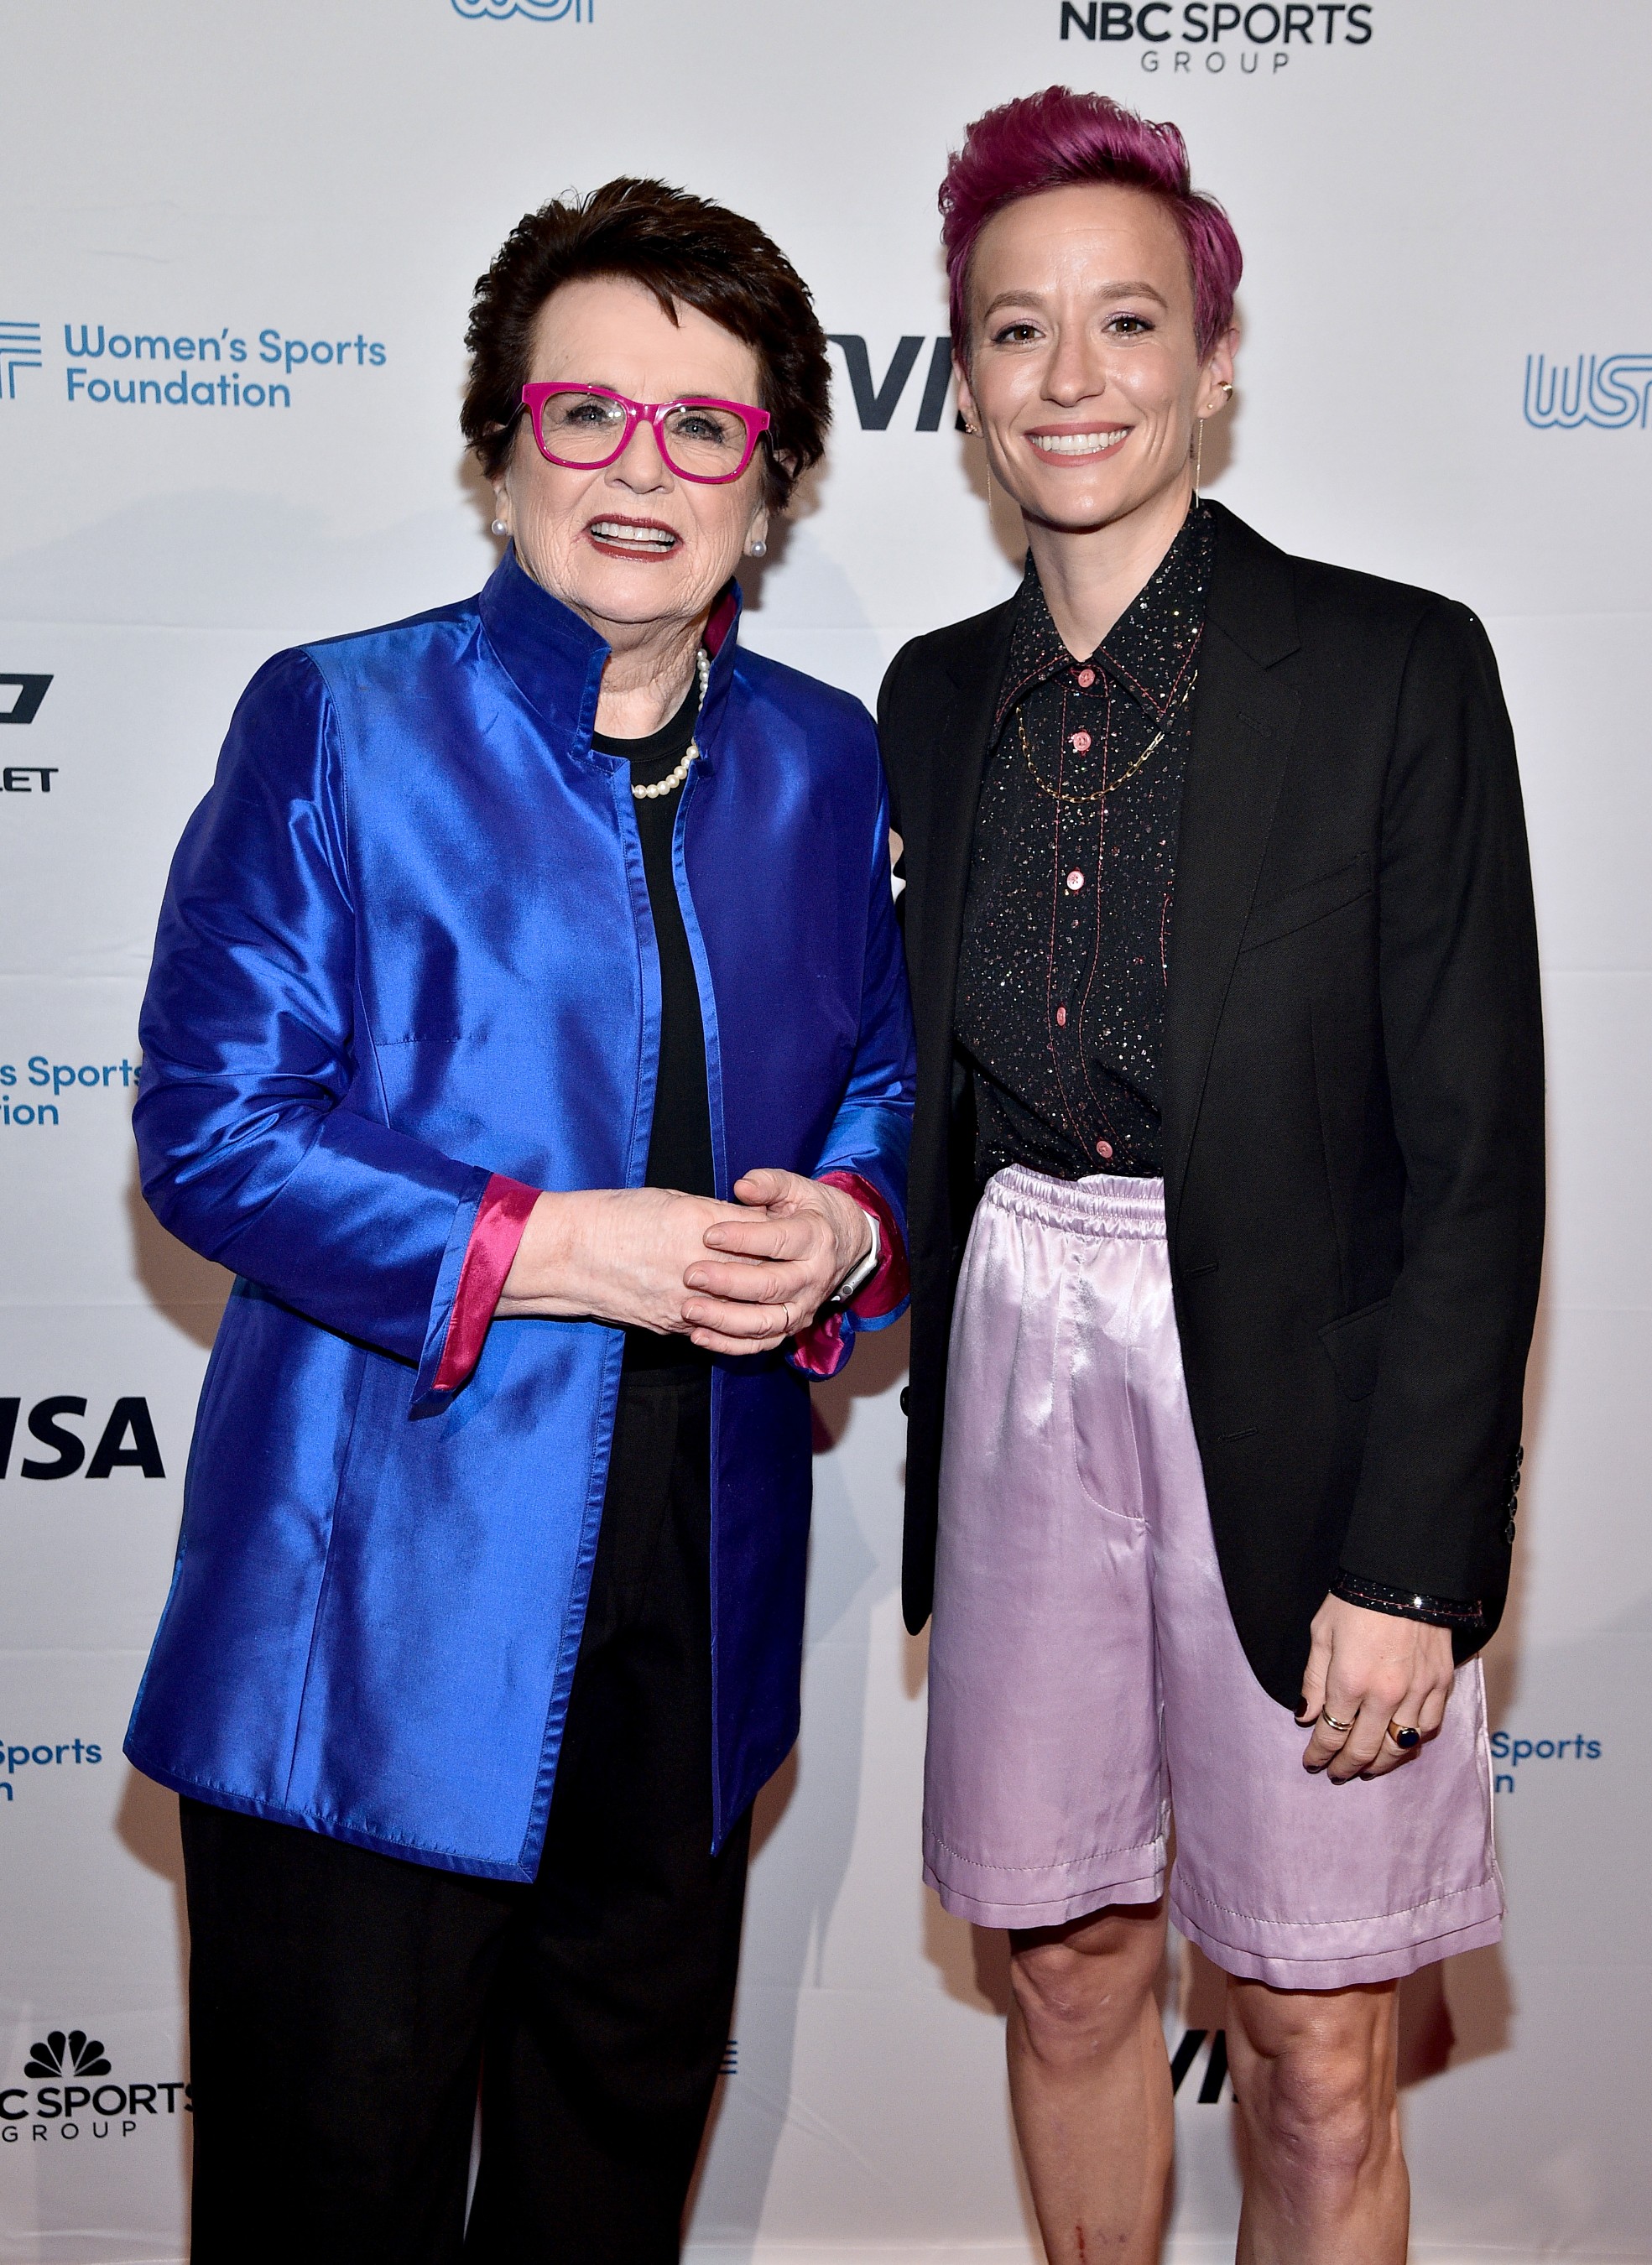 Megan Rapinoe, named the 2019 Team Sportswoman of the Year by the Women’s Sports Foundation, poses with Billie Jean King at the 40th Annual Salute to Women in Sports. (Getty Images for the Women’s Sports Foundation)